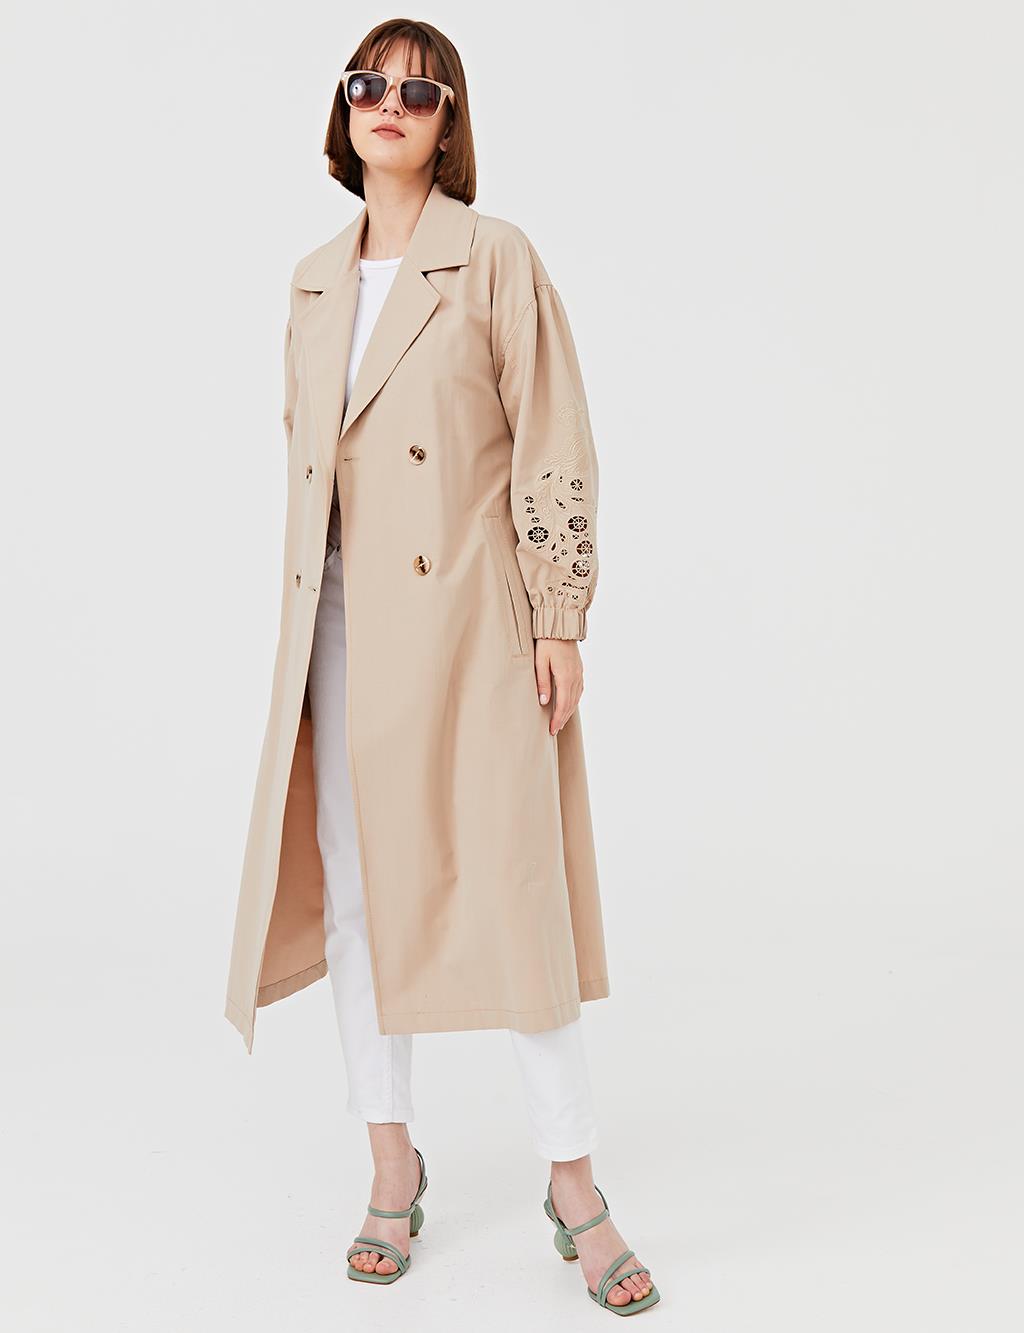 Embroidered Sleeves Off Shoulder Trench Coat B21 14023 Beige